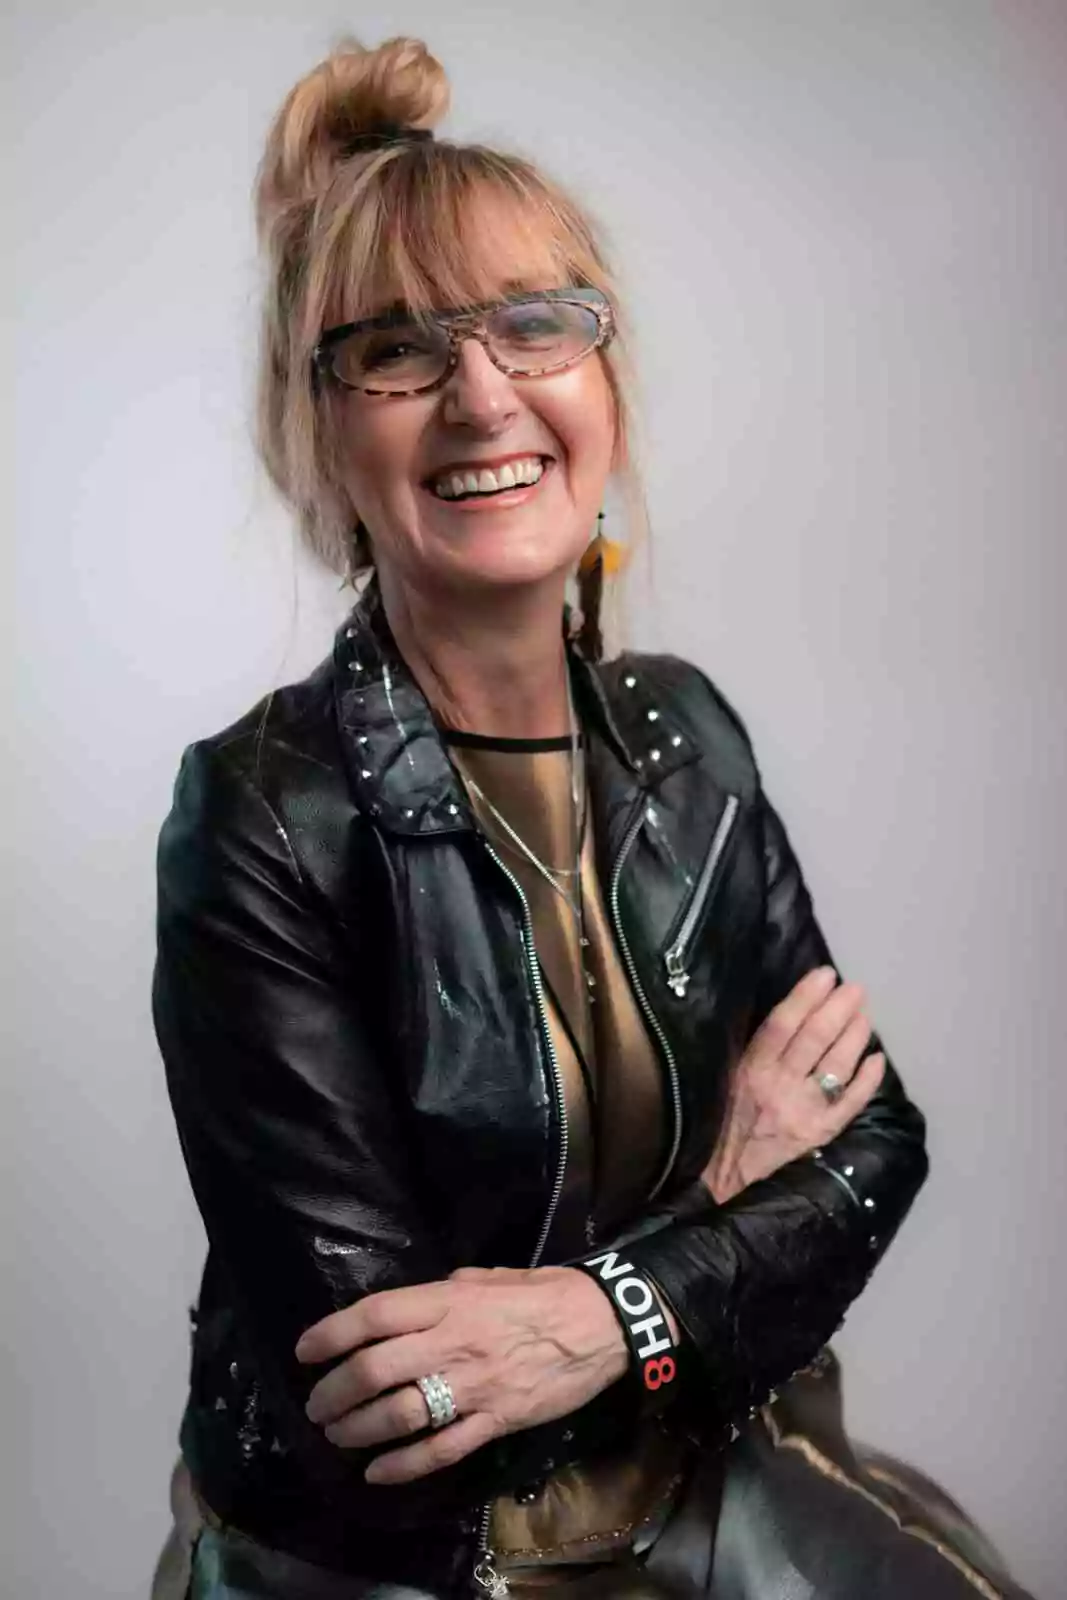 Nancy Volpe Beringer, a white woman with blonde hair and glasses. She is wearing a brown shirt and black leather jacket.